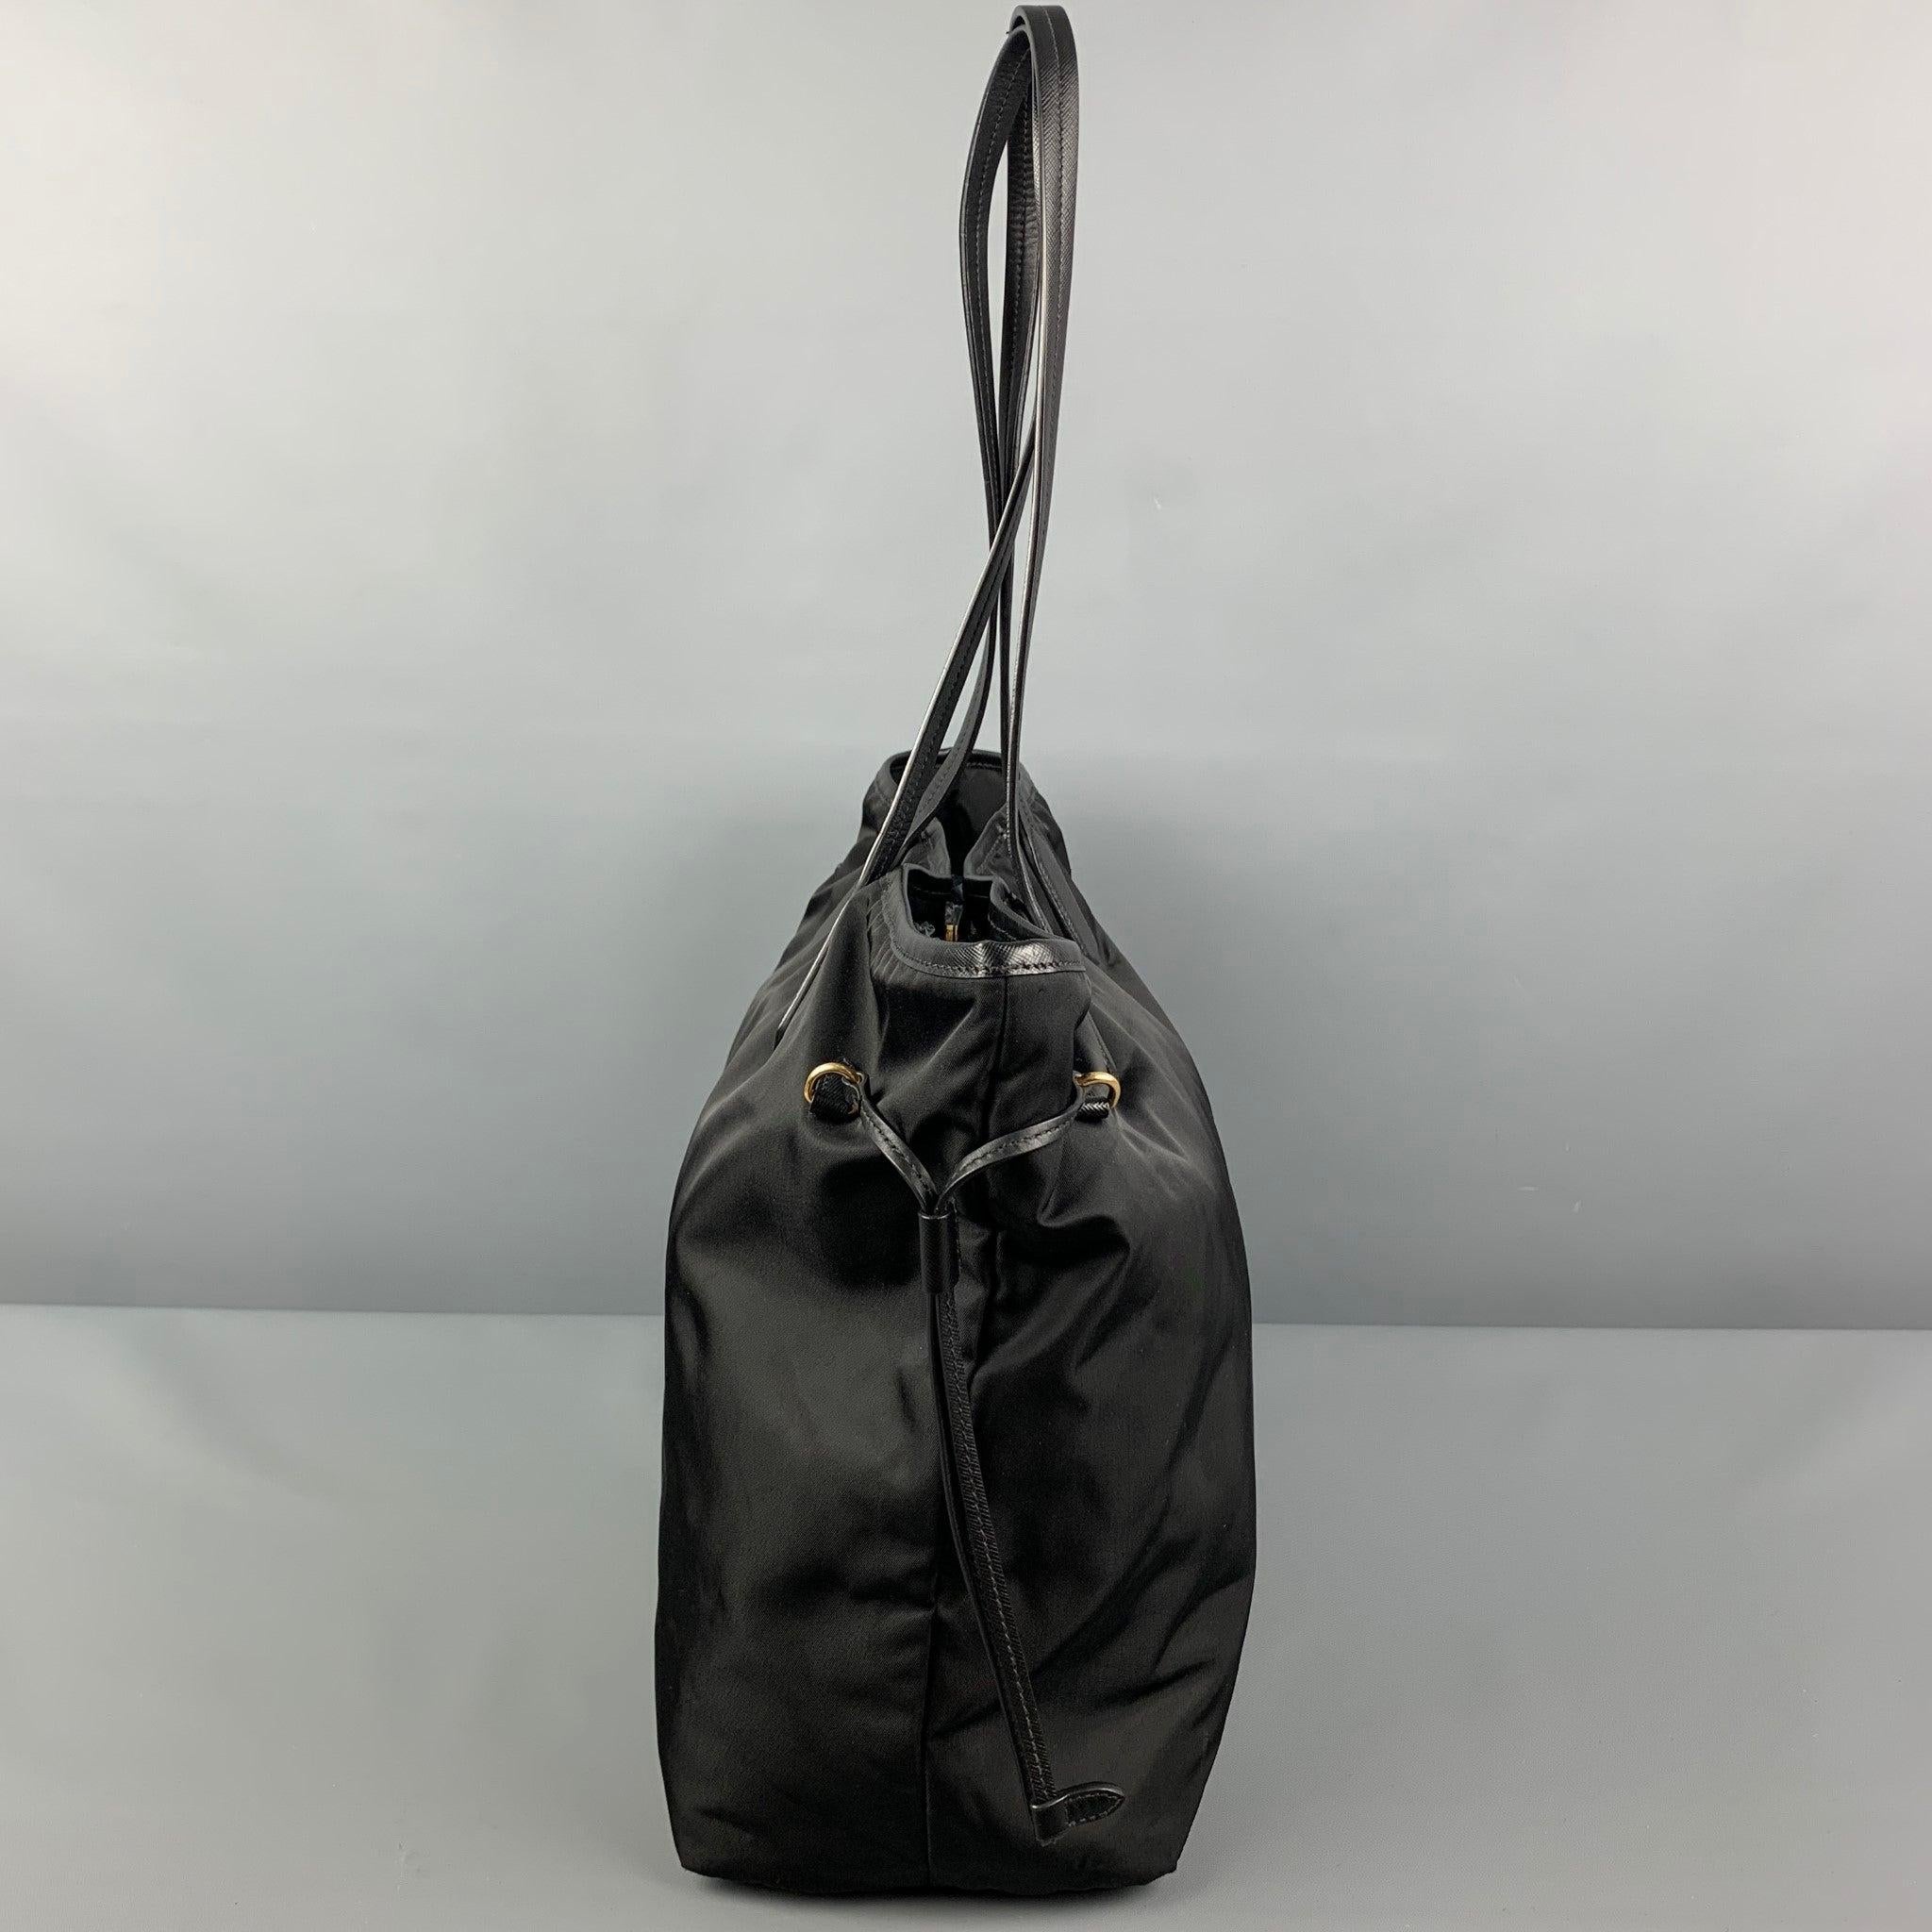 PRADA handbag comes in a black nylon featuring a tote style, leather trim, gold tone hardware, adjustable side straps, inner pocket, top handles, and a snap button closure. Made in Italy.
 Very Good
 Pre-Owned Condition. 
 

 Marked:  165 
 

